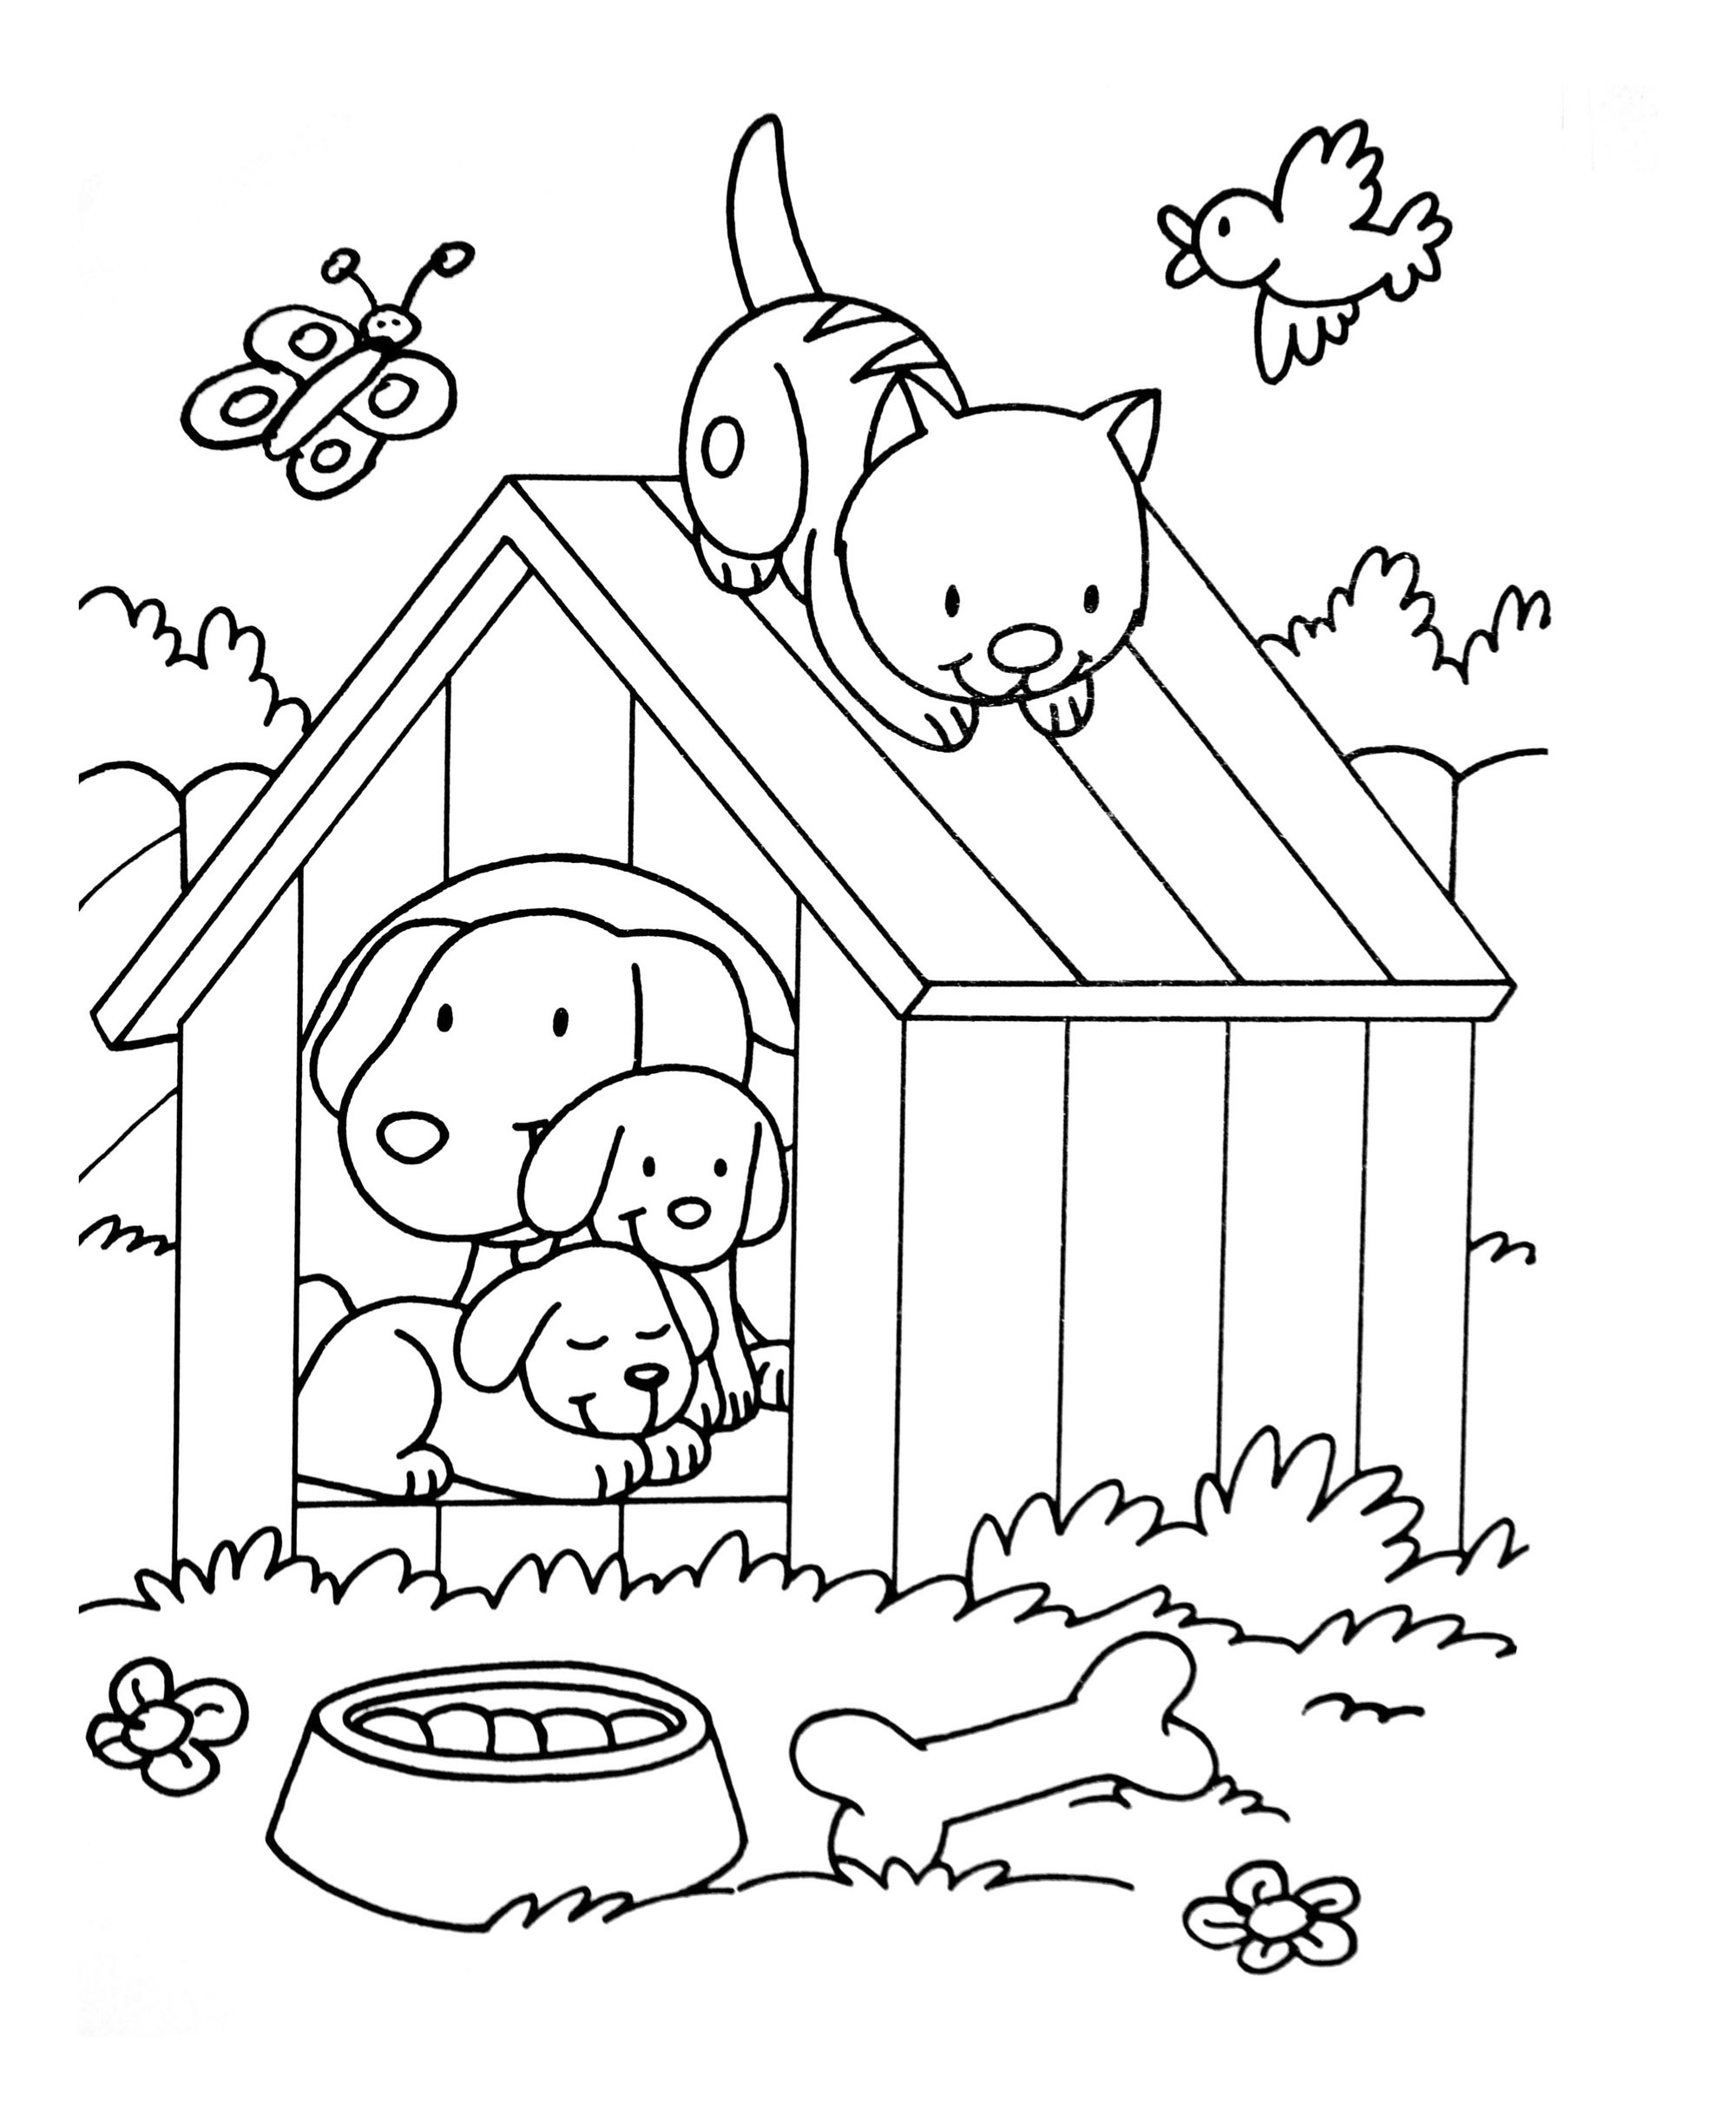 Dogs For Children Dogs Cats Playing Dogs Kids Coloring Pages